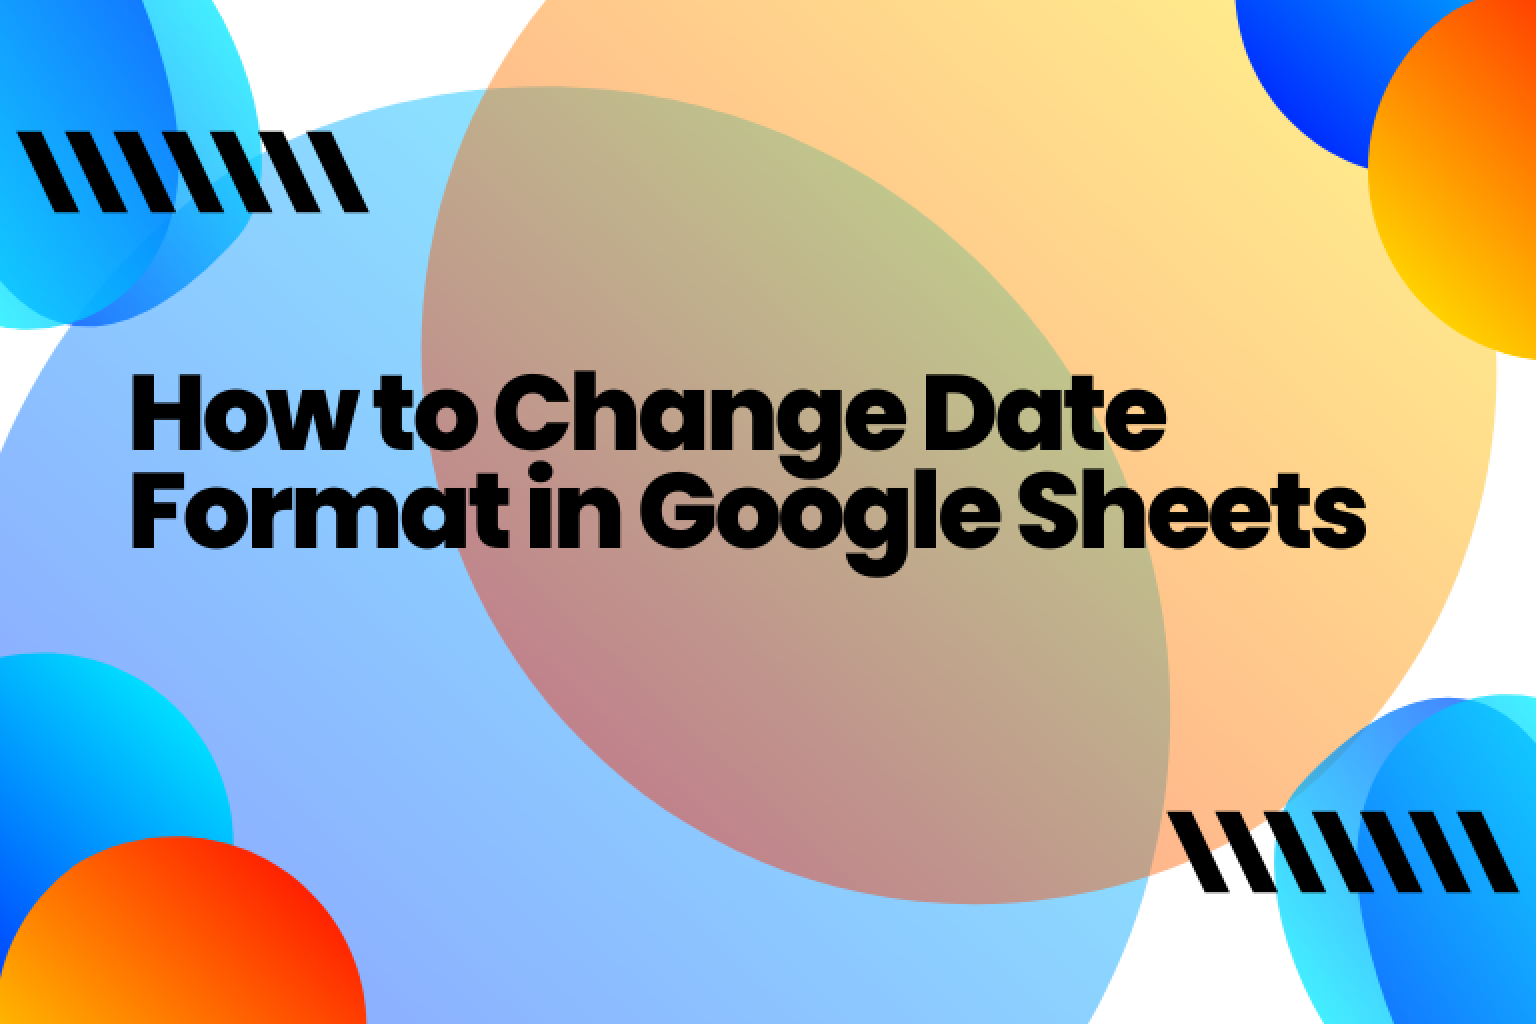 Learn how to change date formats in Google Sheets with step-by-step instructions. Convert text to date, change to European style, and more.